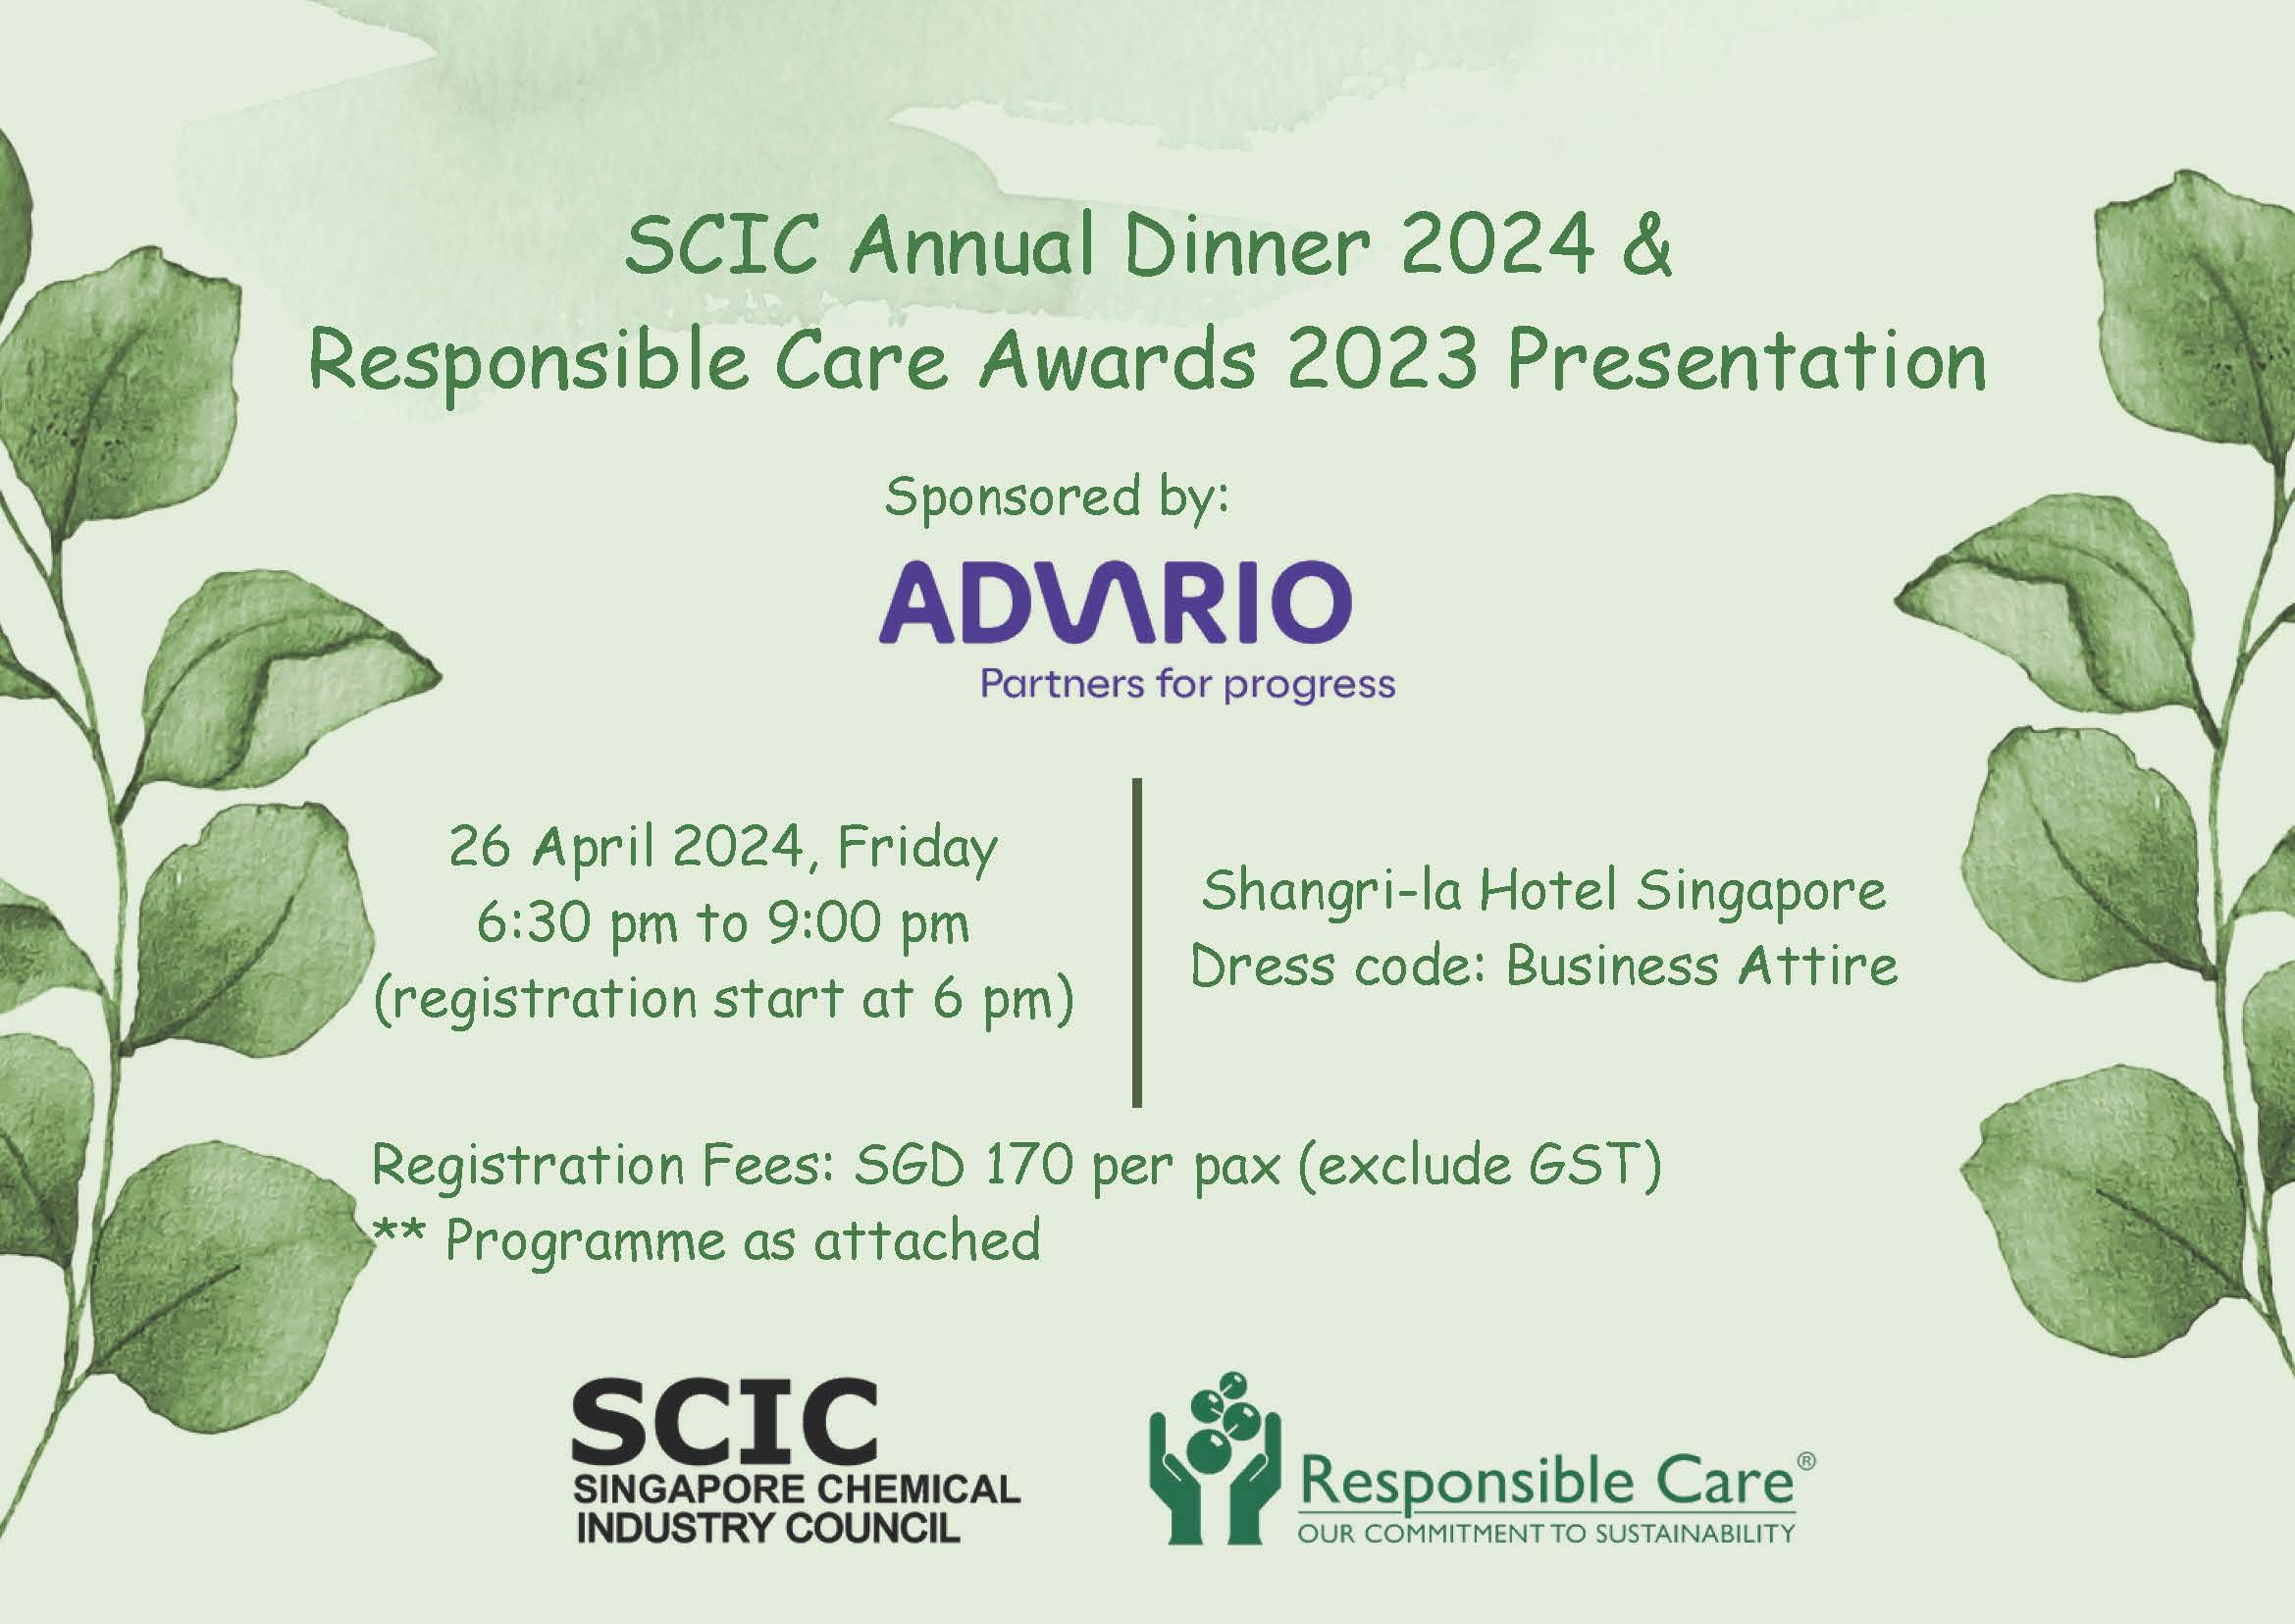 SCIC Annual Dinner 2024 Responsible Care Awards 2023 Presentation banner Page 1